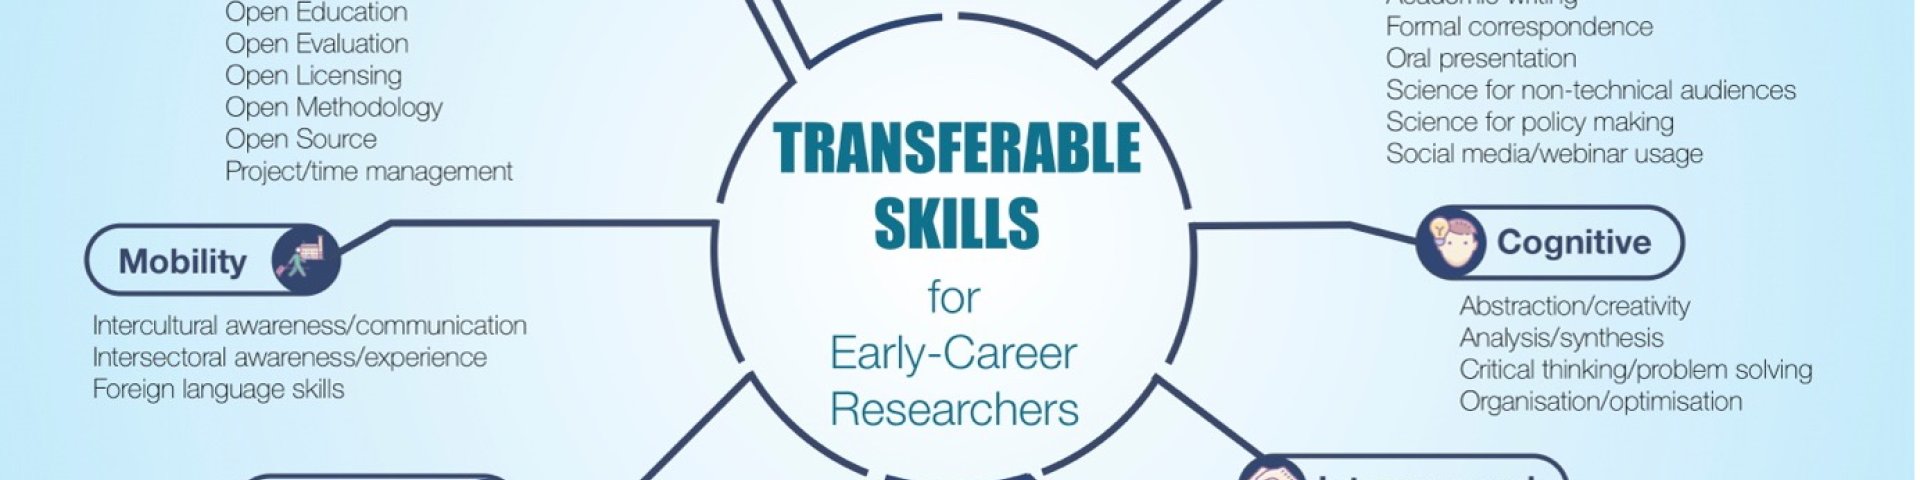 Infographic about transferable skills for early-career researchers